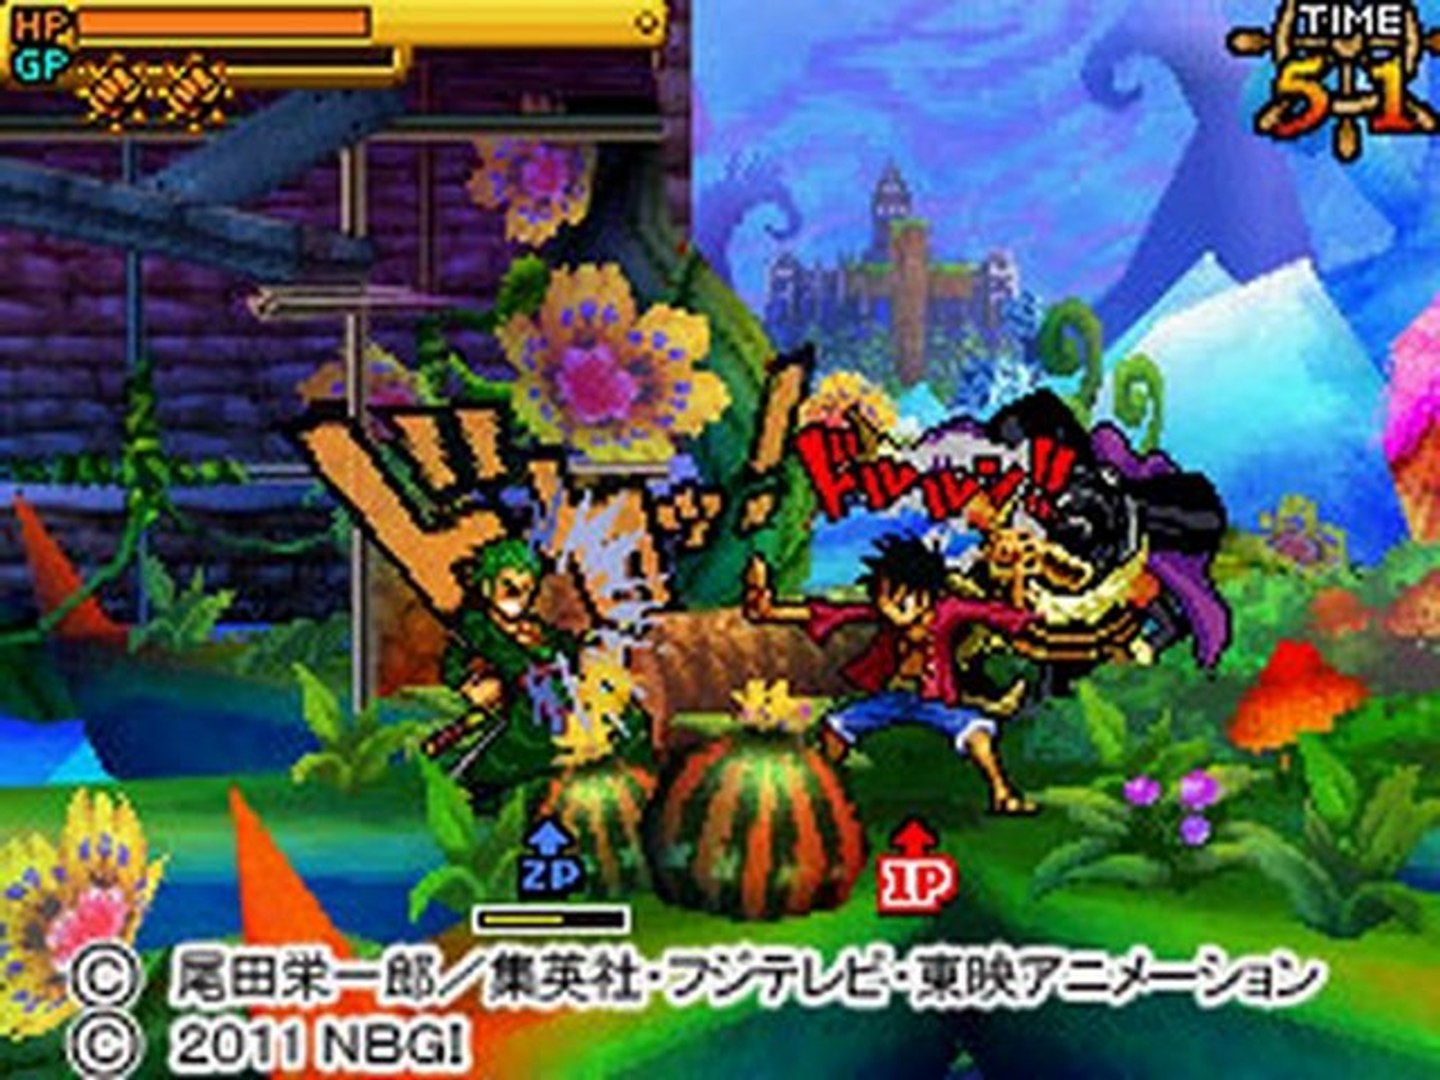 DS] One Piece Gigant Battle 2 Shin Sekai nds rom download - video  Dailymotion